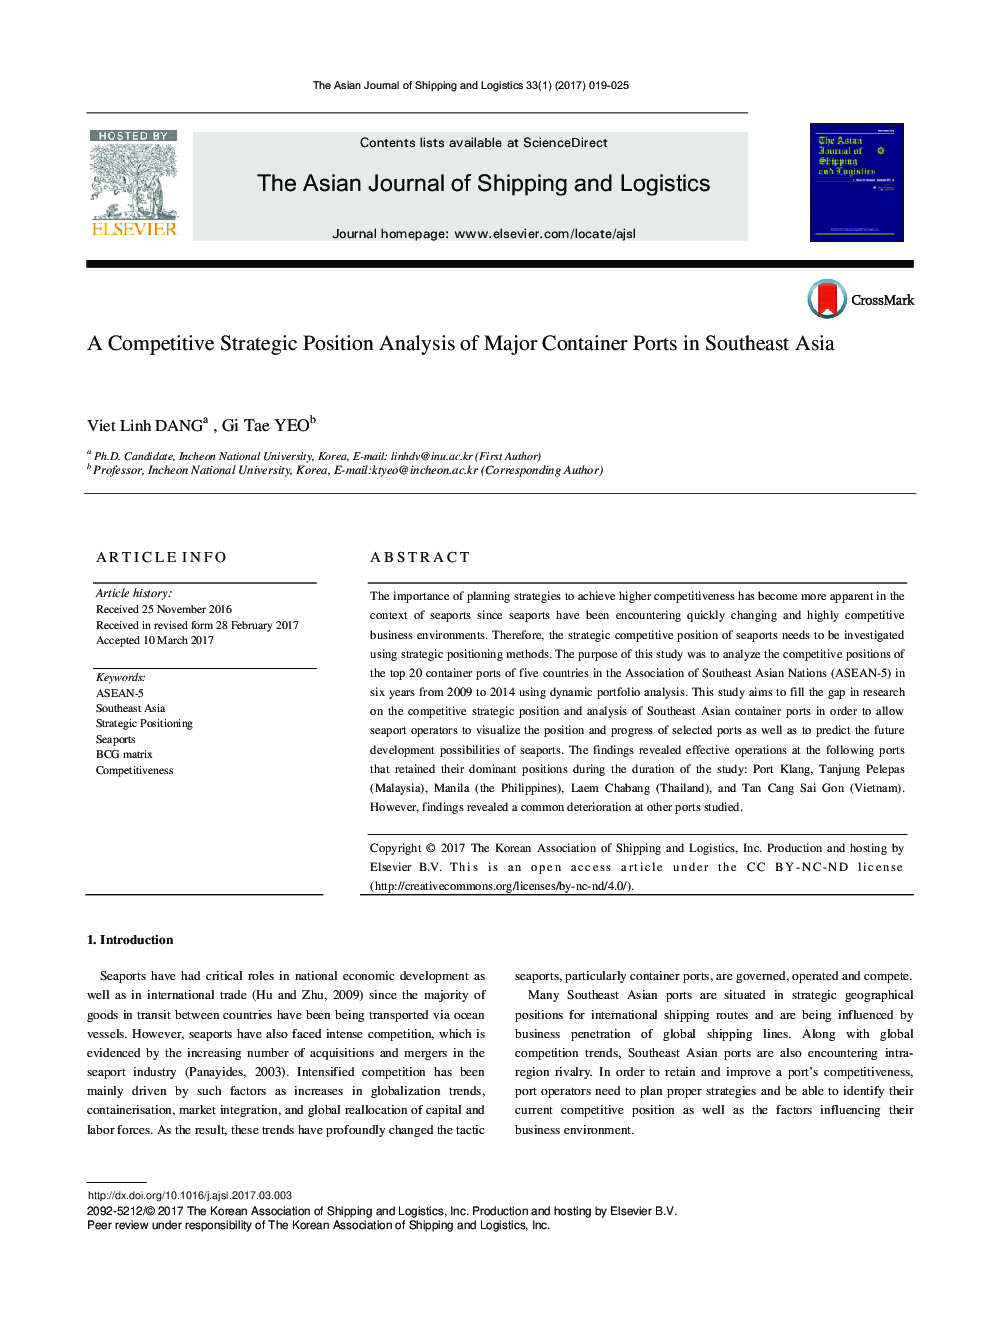 A Competitive Strategic Position Analysis of Major Container Ports in Southeast Asia